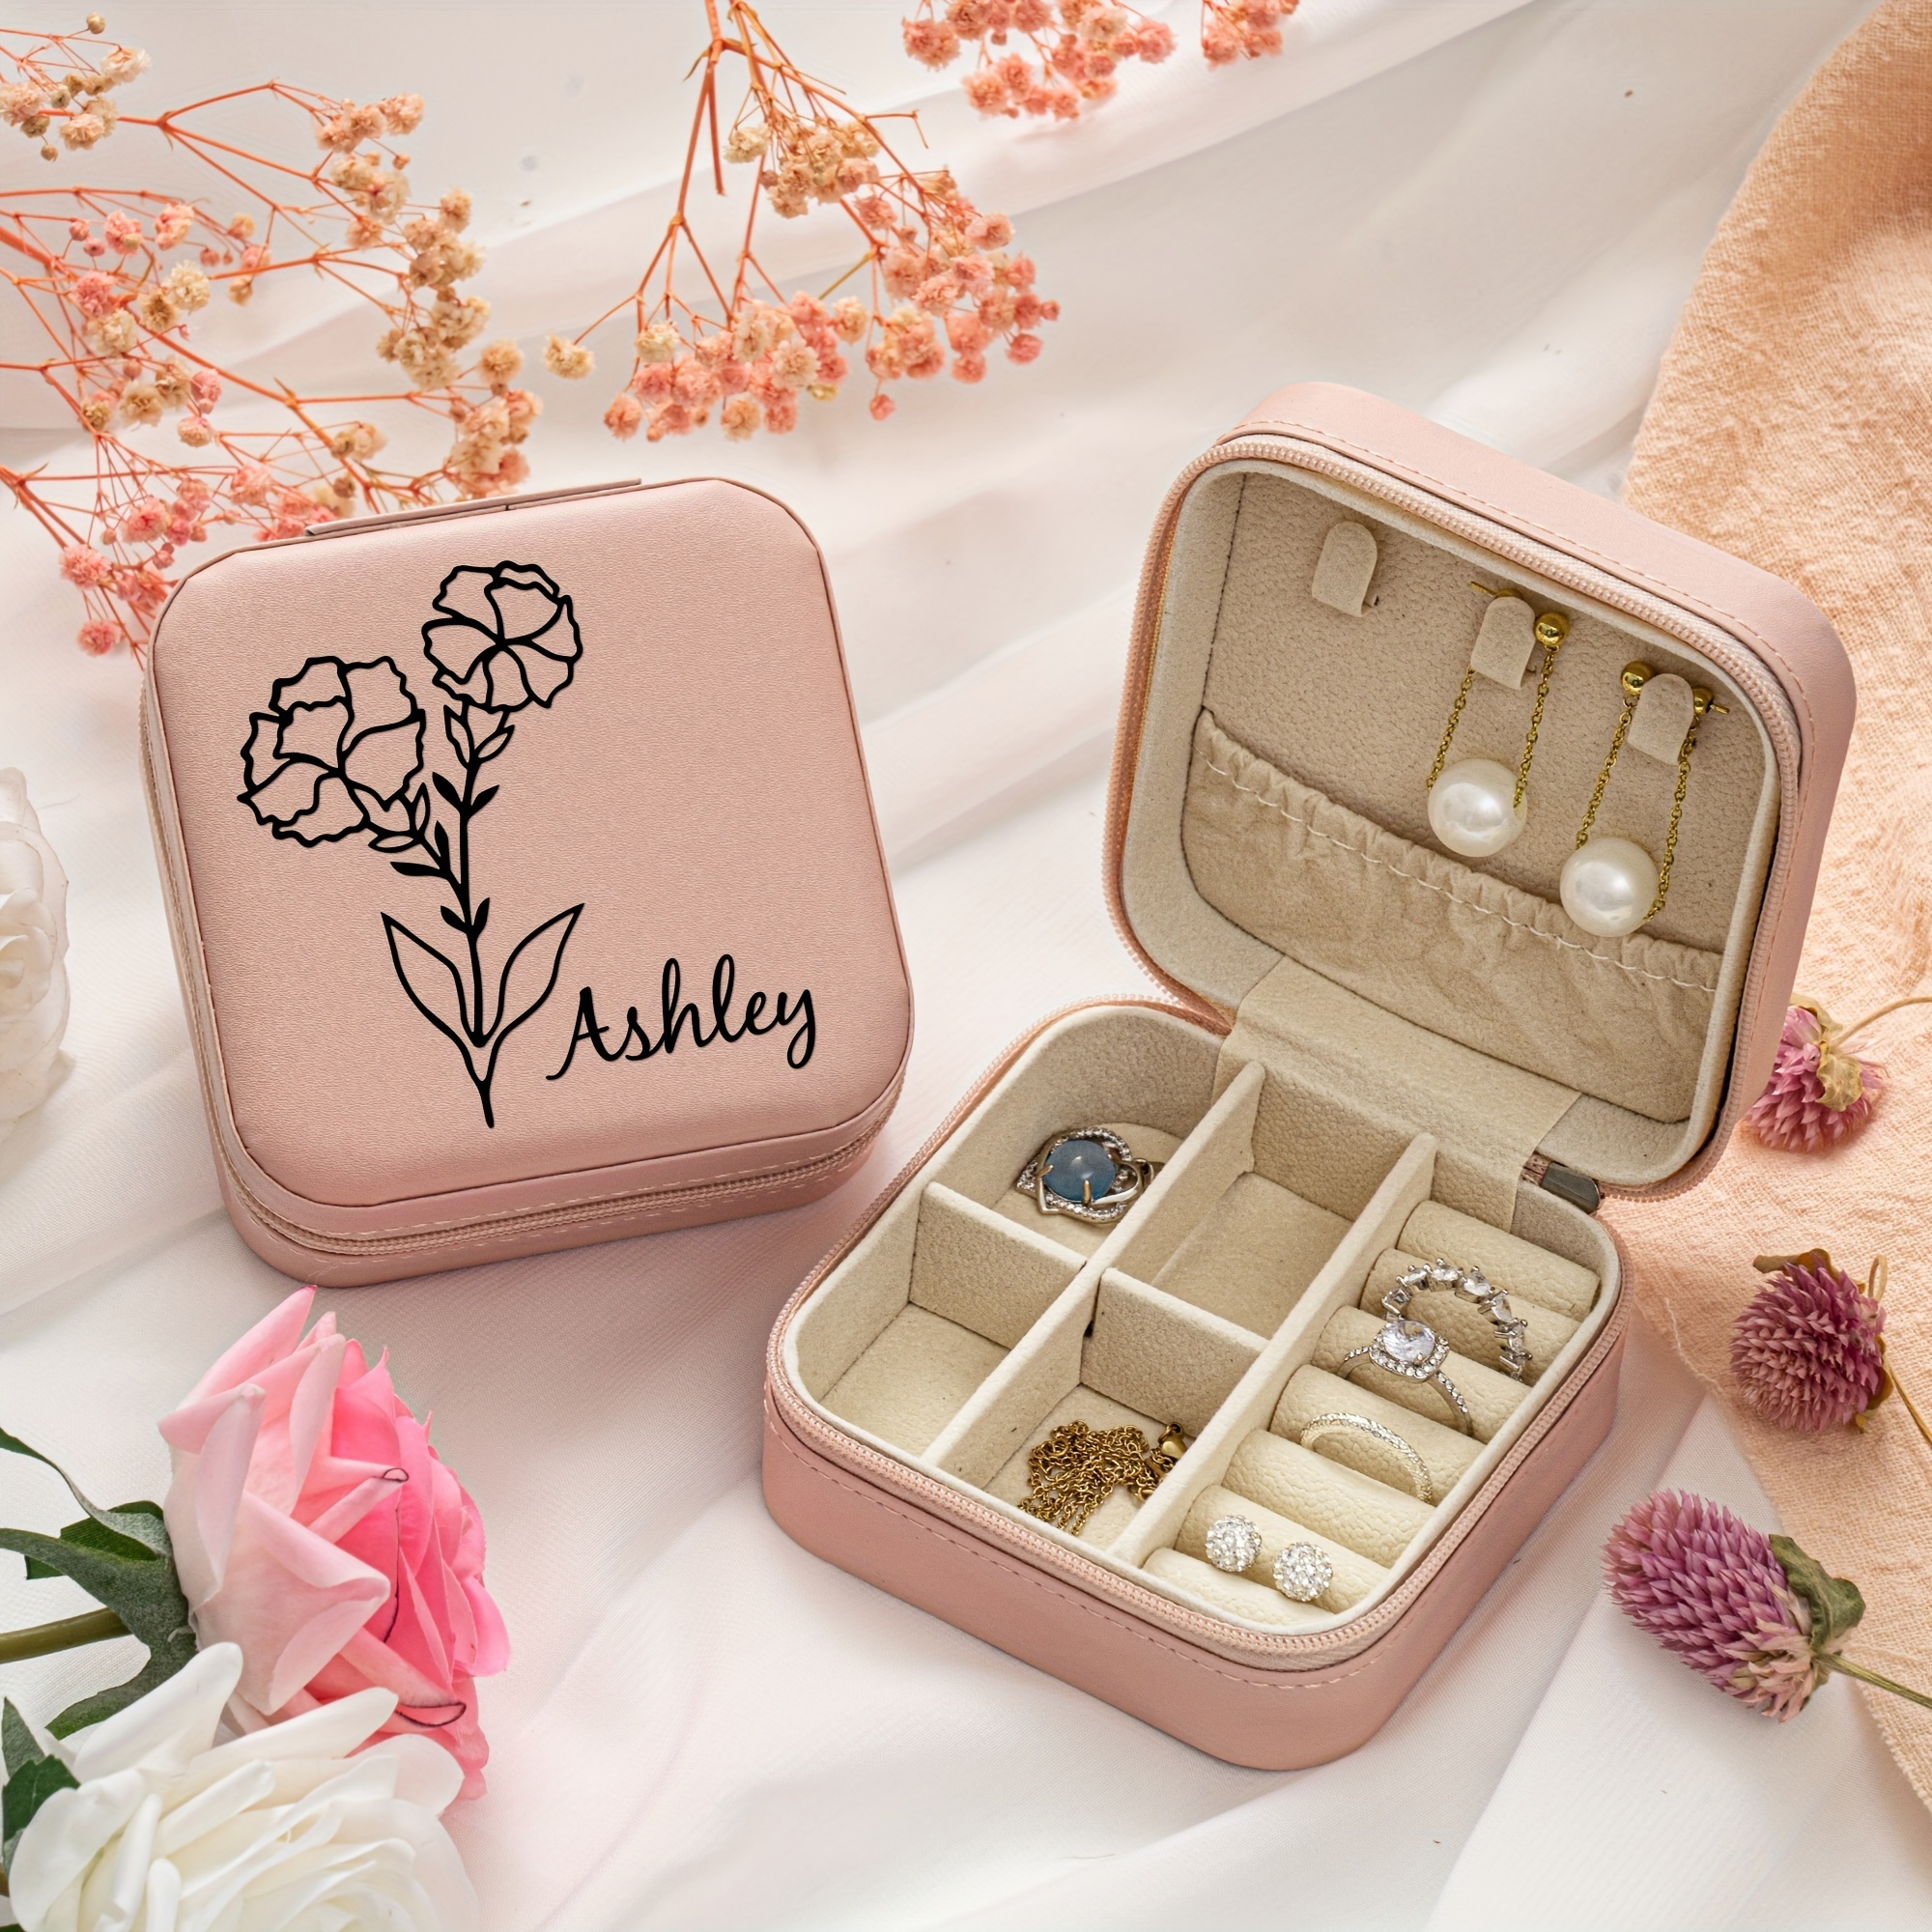 Travel Jewelry Boxes for Women Jewelry Organizer Box Storage Portable Travel  Jewelry Case Pink Initial Travel Accessories Jewelry Box Birthday Gifts  Stuff for Women Girls